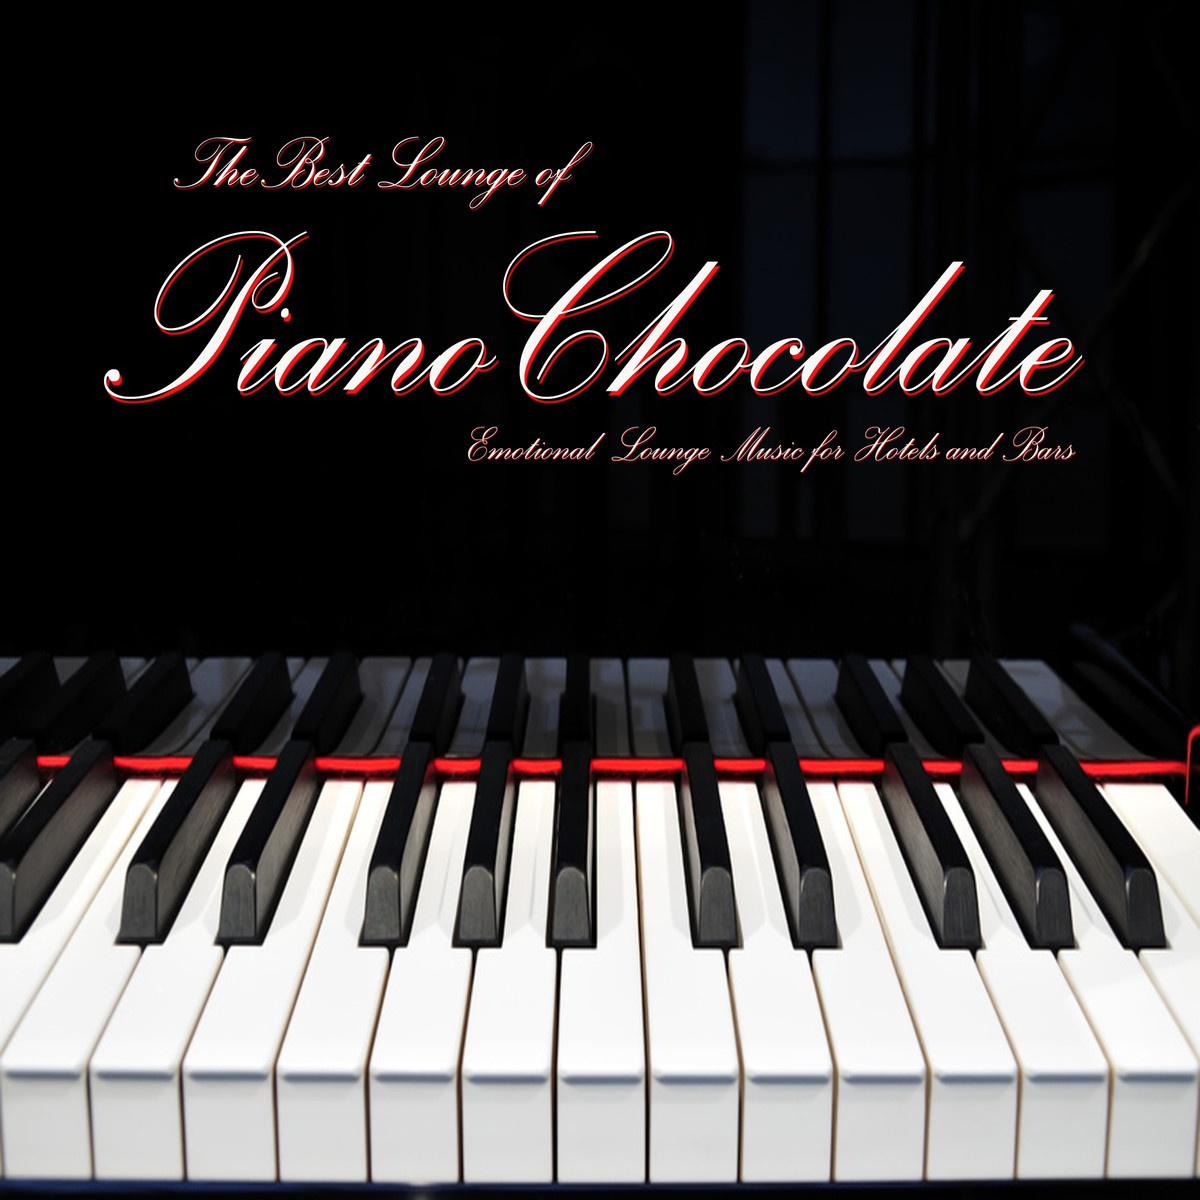 The Best Lounge of Pianochocolate (Emotional Lounge Music for Hotels and Bars)专辑